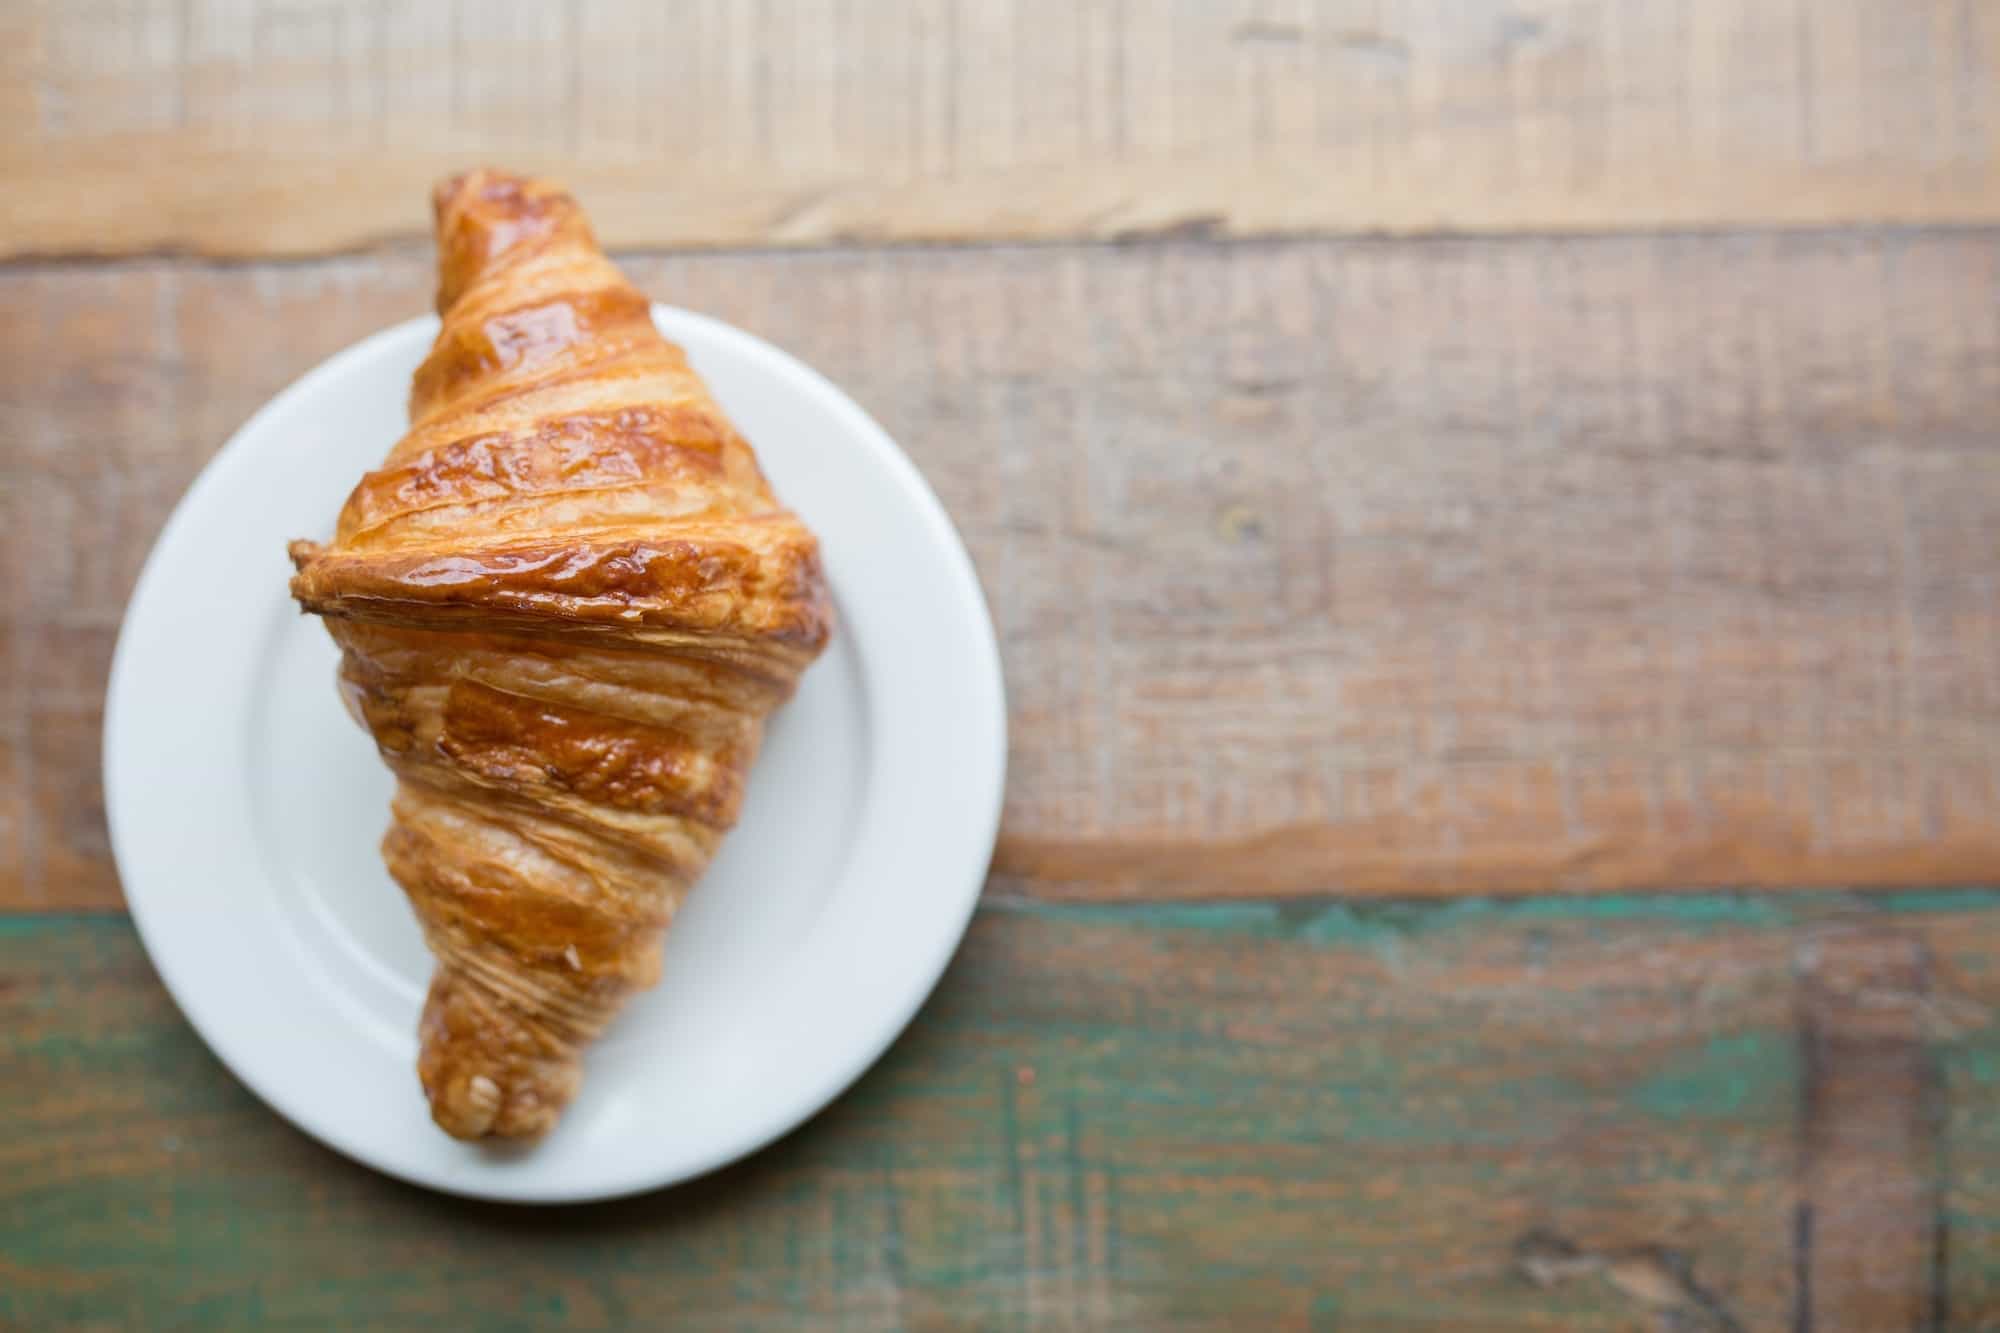 Where to buy the best croissants in Paris' Montmartre, like this fluffy, buttery croissant.